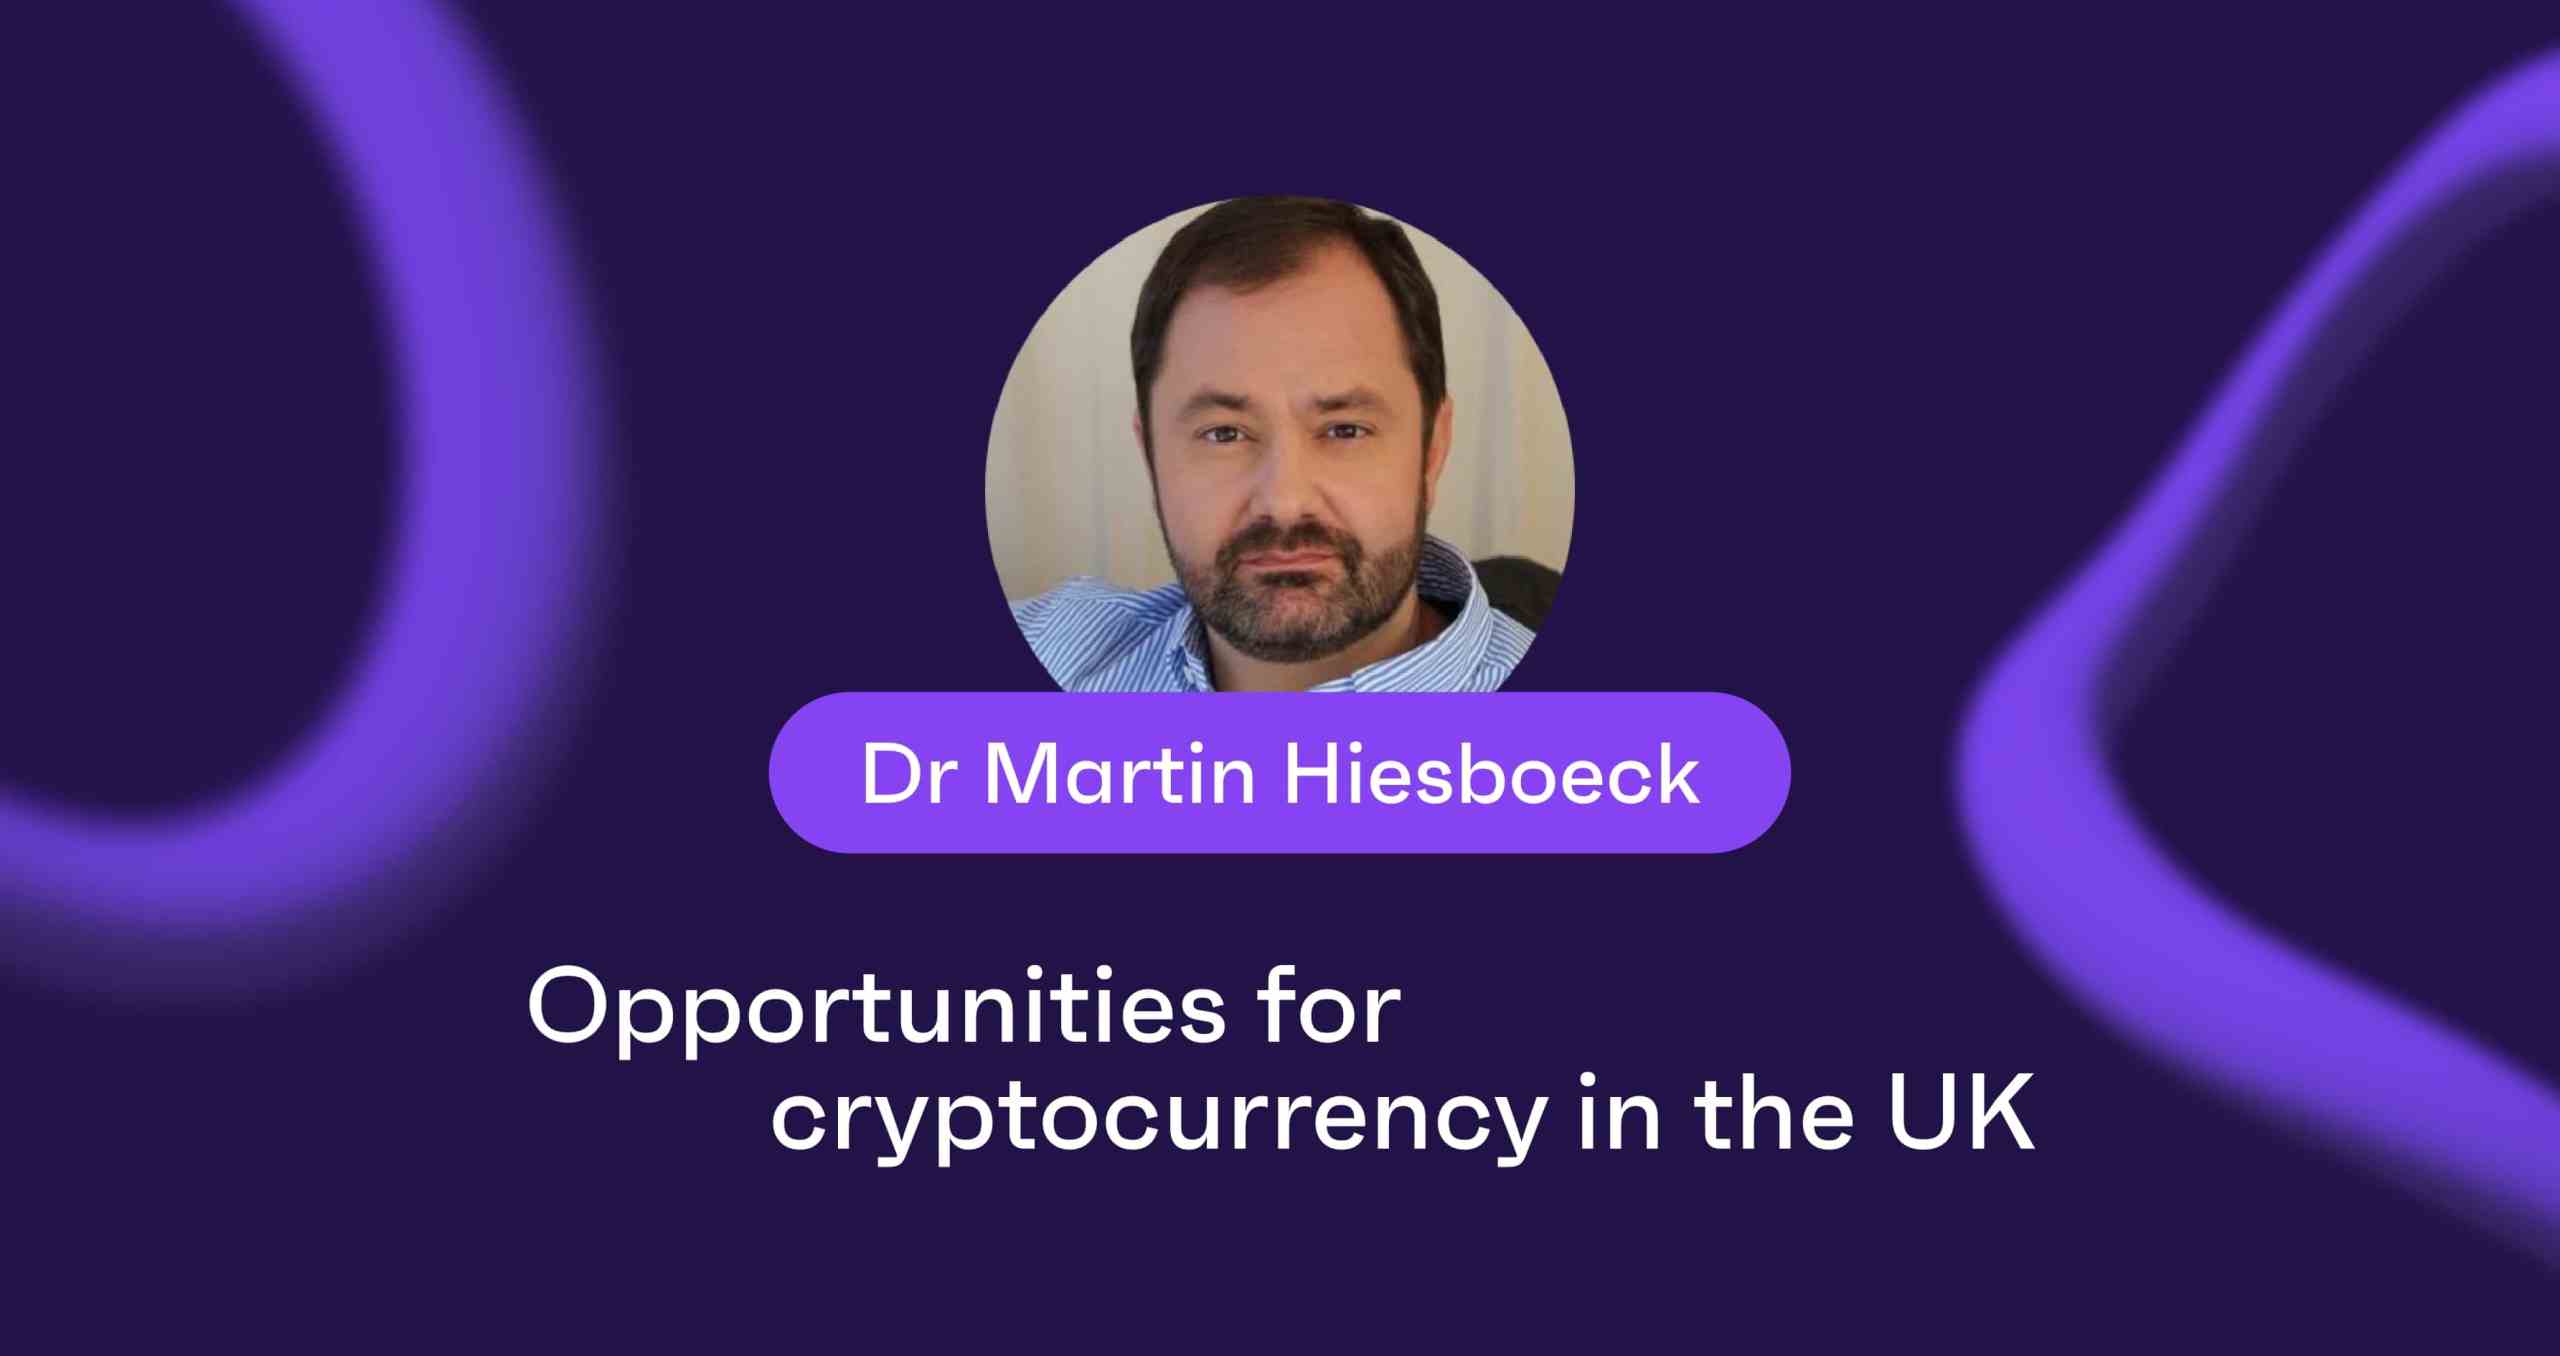 Dr Martin Hiesboeck: Opportunities for cryptocurrency in the UK